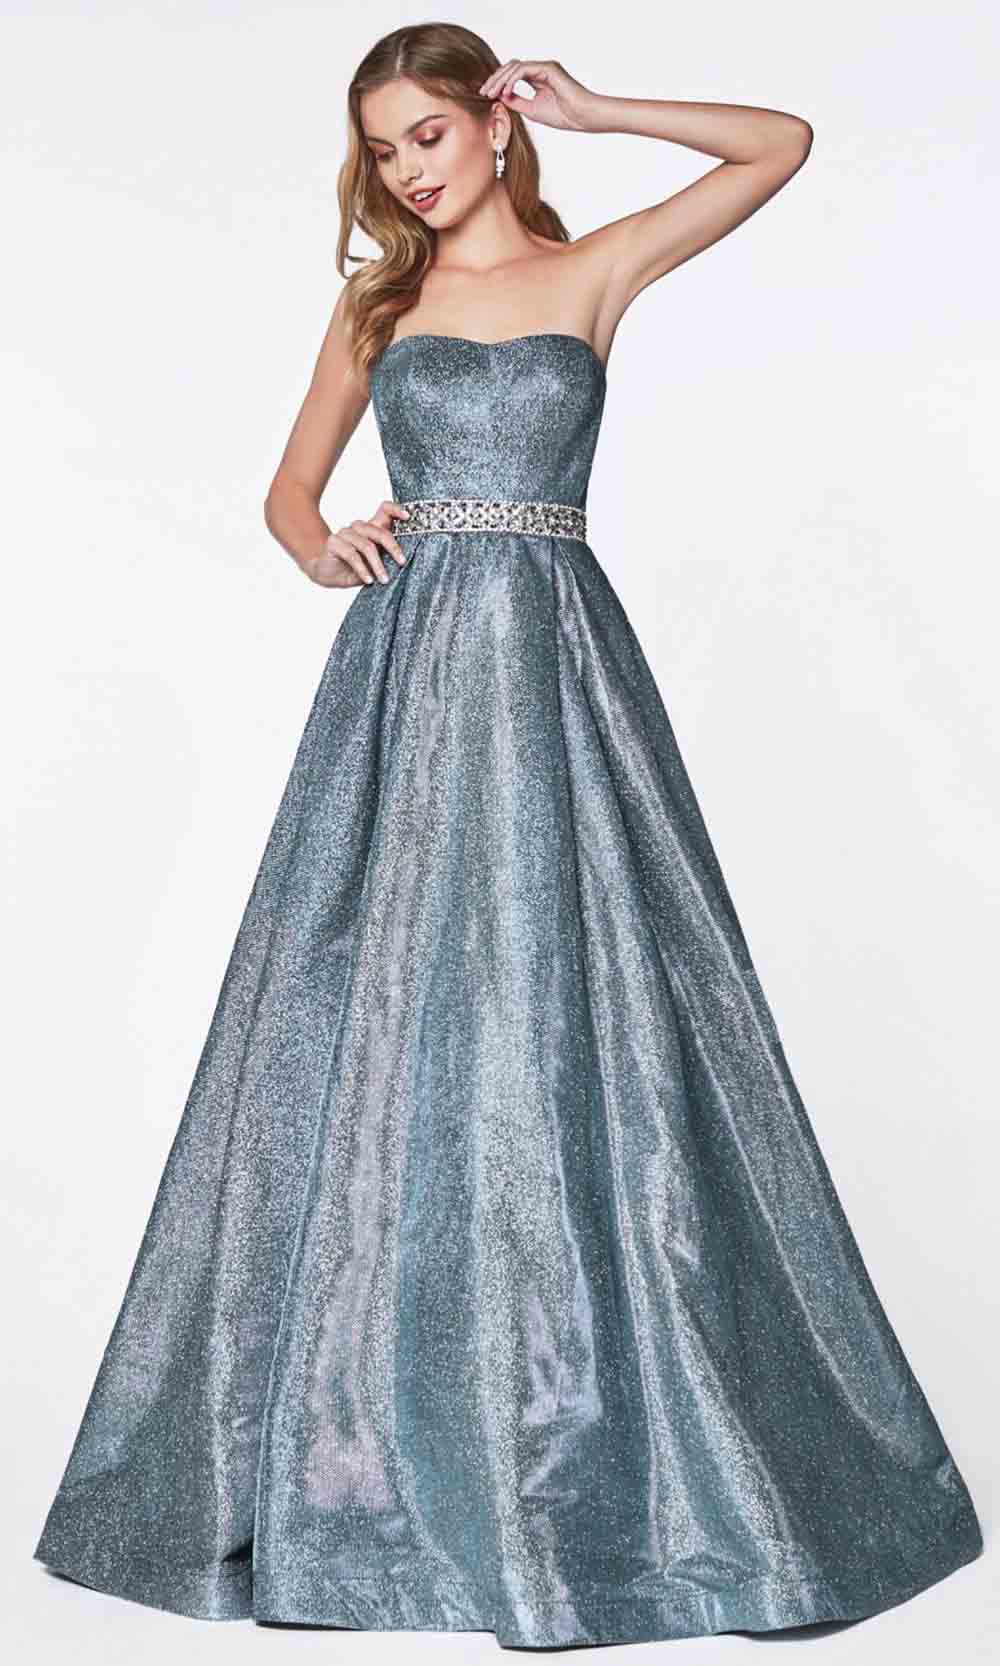 Cinderella Divine - 9175 Glittered A-Line Gown In Blue and Silver